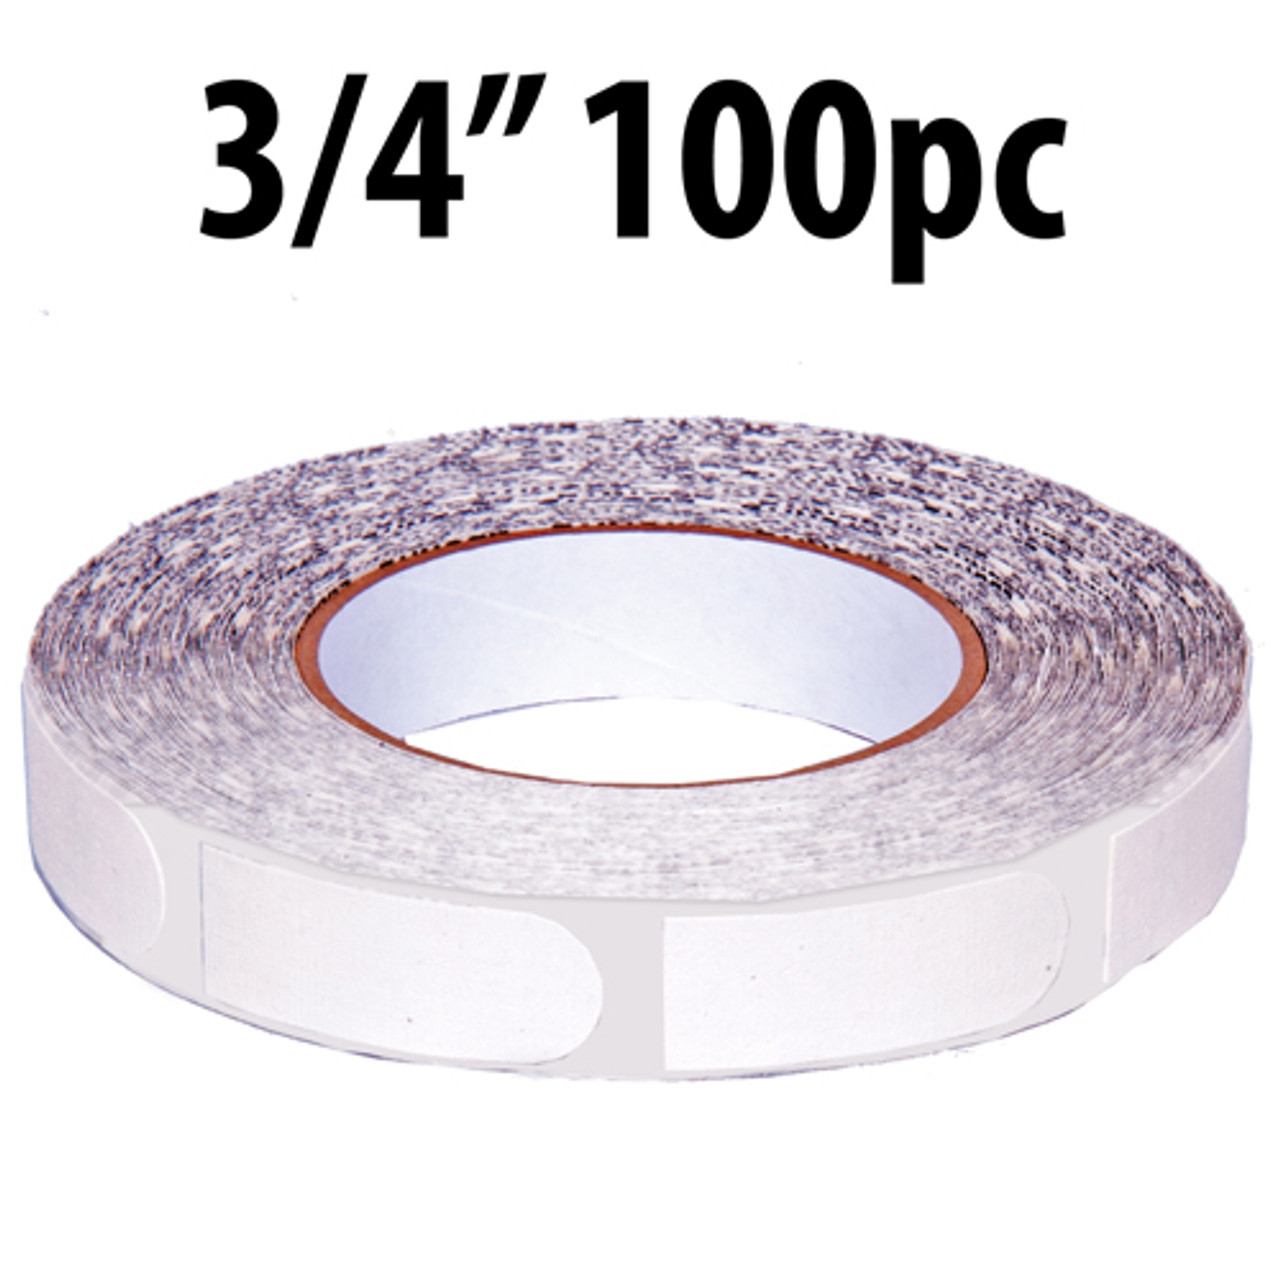 Bowling Ball Factory 3/4" White Textured Bowling Ball Thumb Tape Roll 100 Ct 